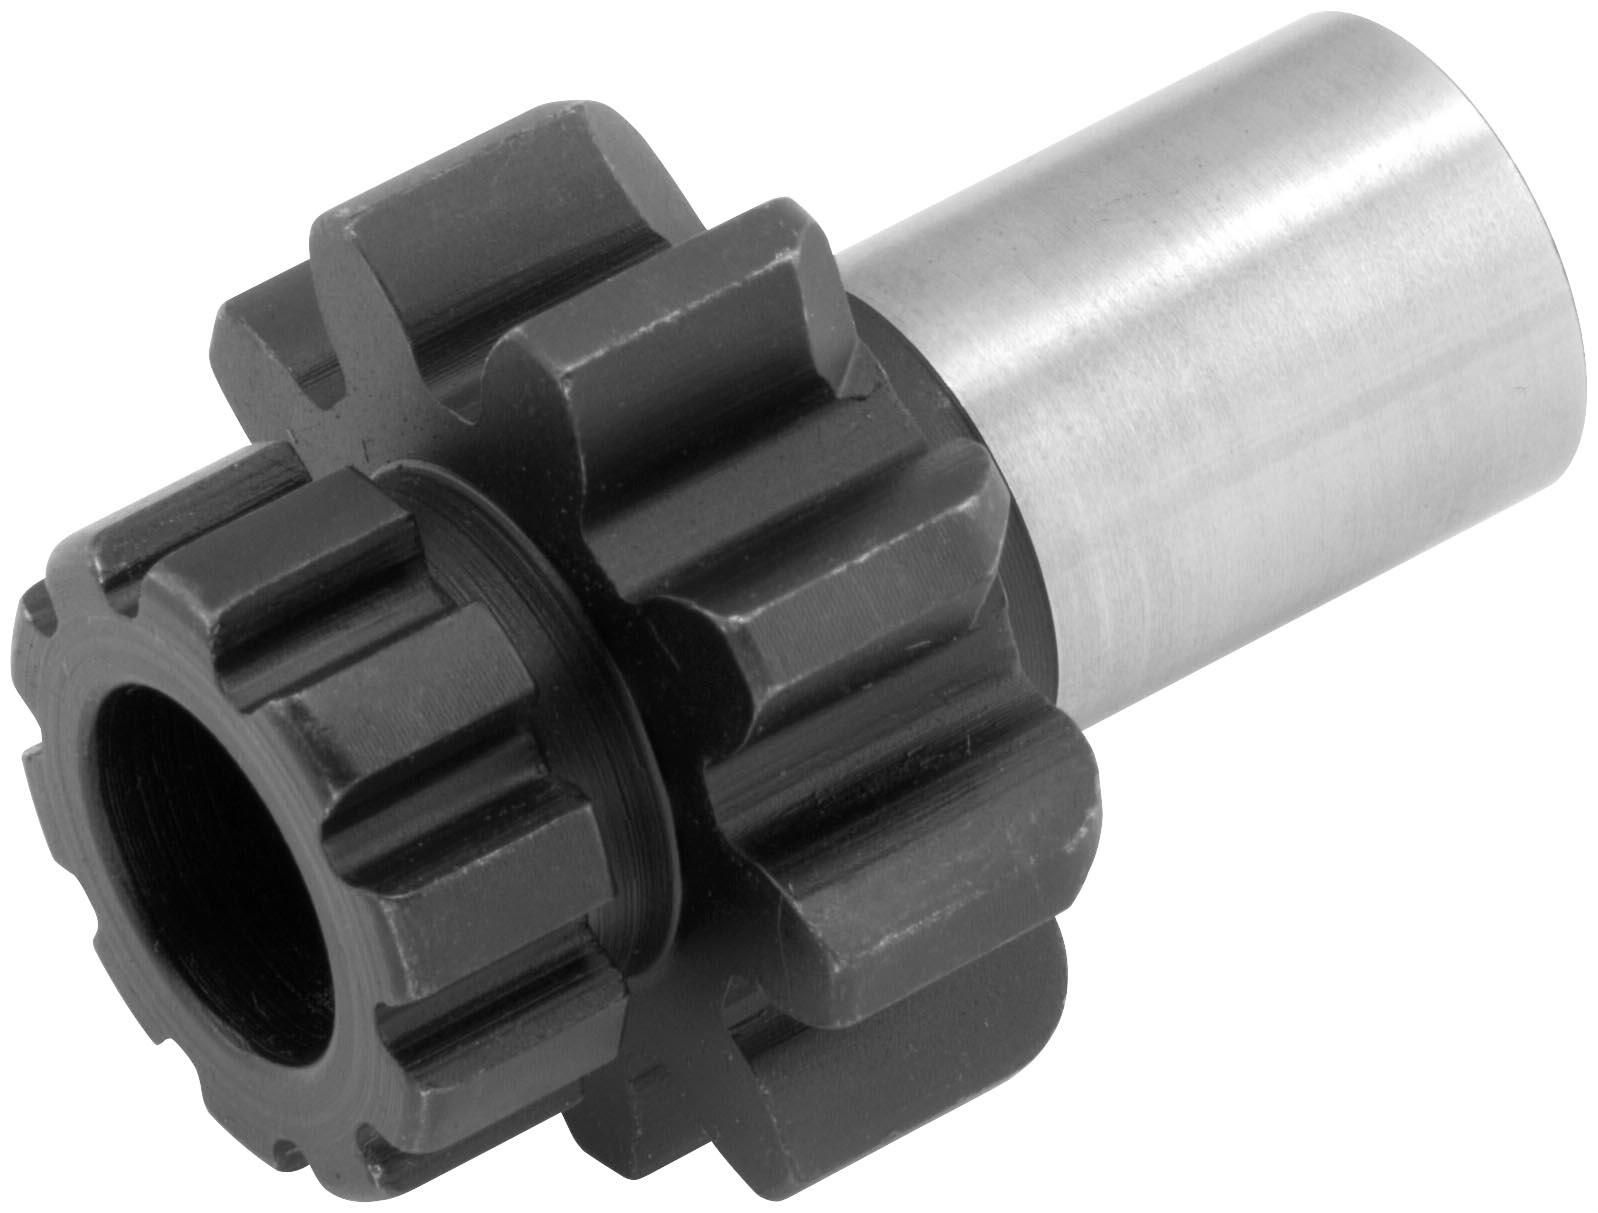 49CL-EVOLUTION-EV-1010-1271 9 Tooth Pinion Gear for Stock Stater Ring Gear